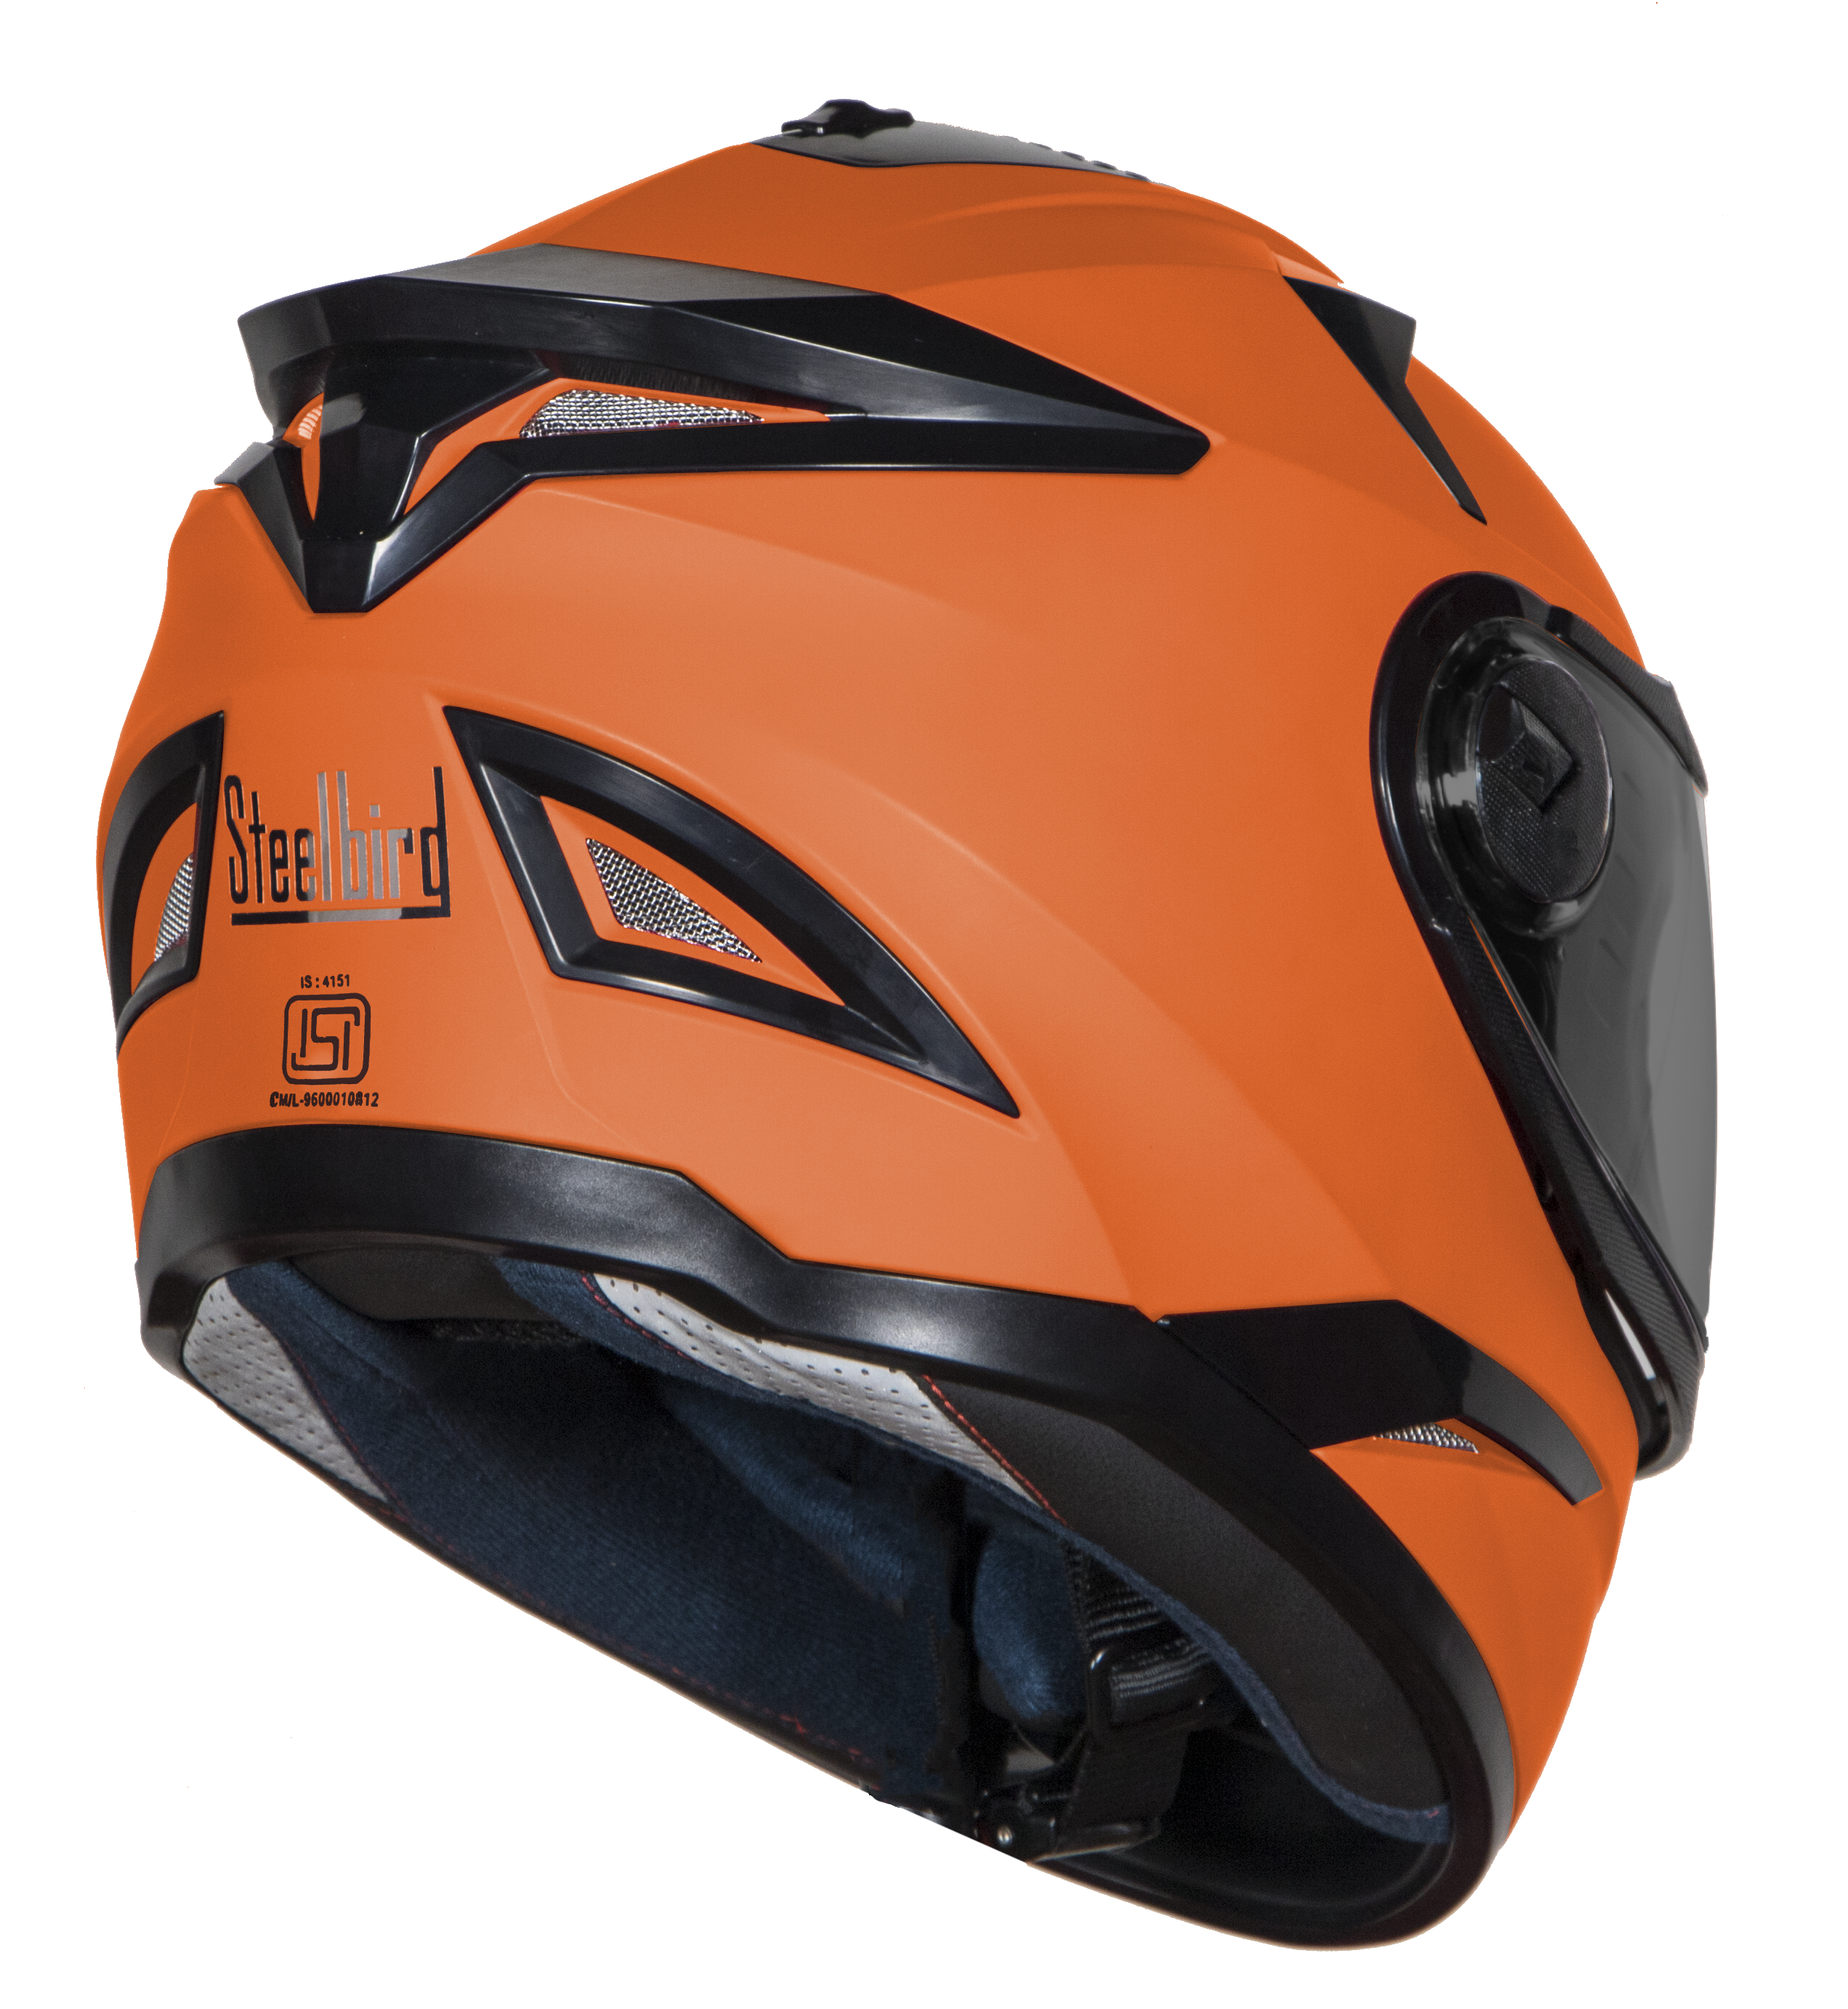 SBH-17 OPT GLOSSY FLUO ORANGE (WITH EXTRA FREE CABLE LOCK AND CLEAR VISOR)